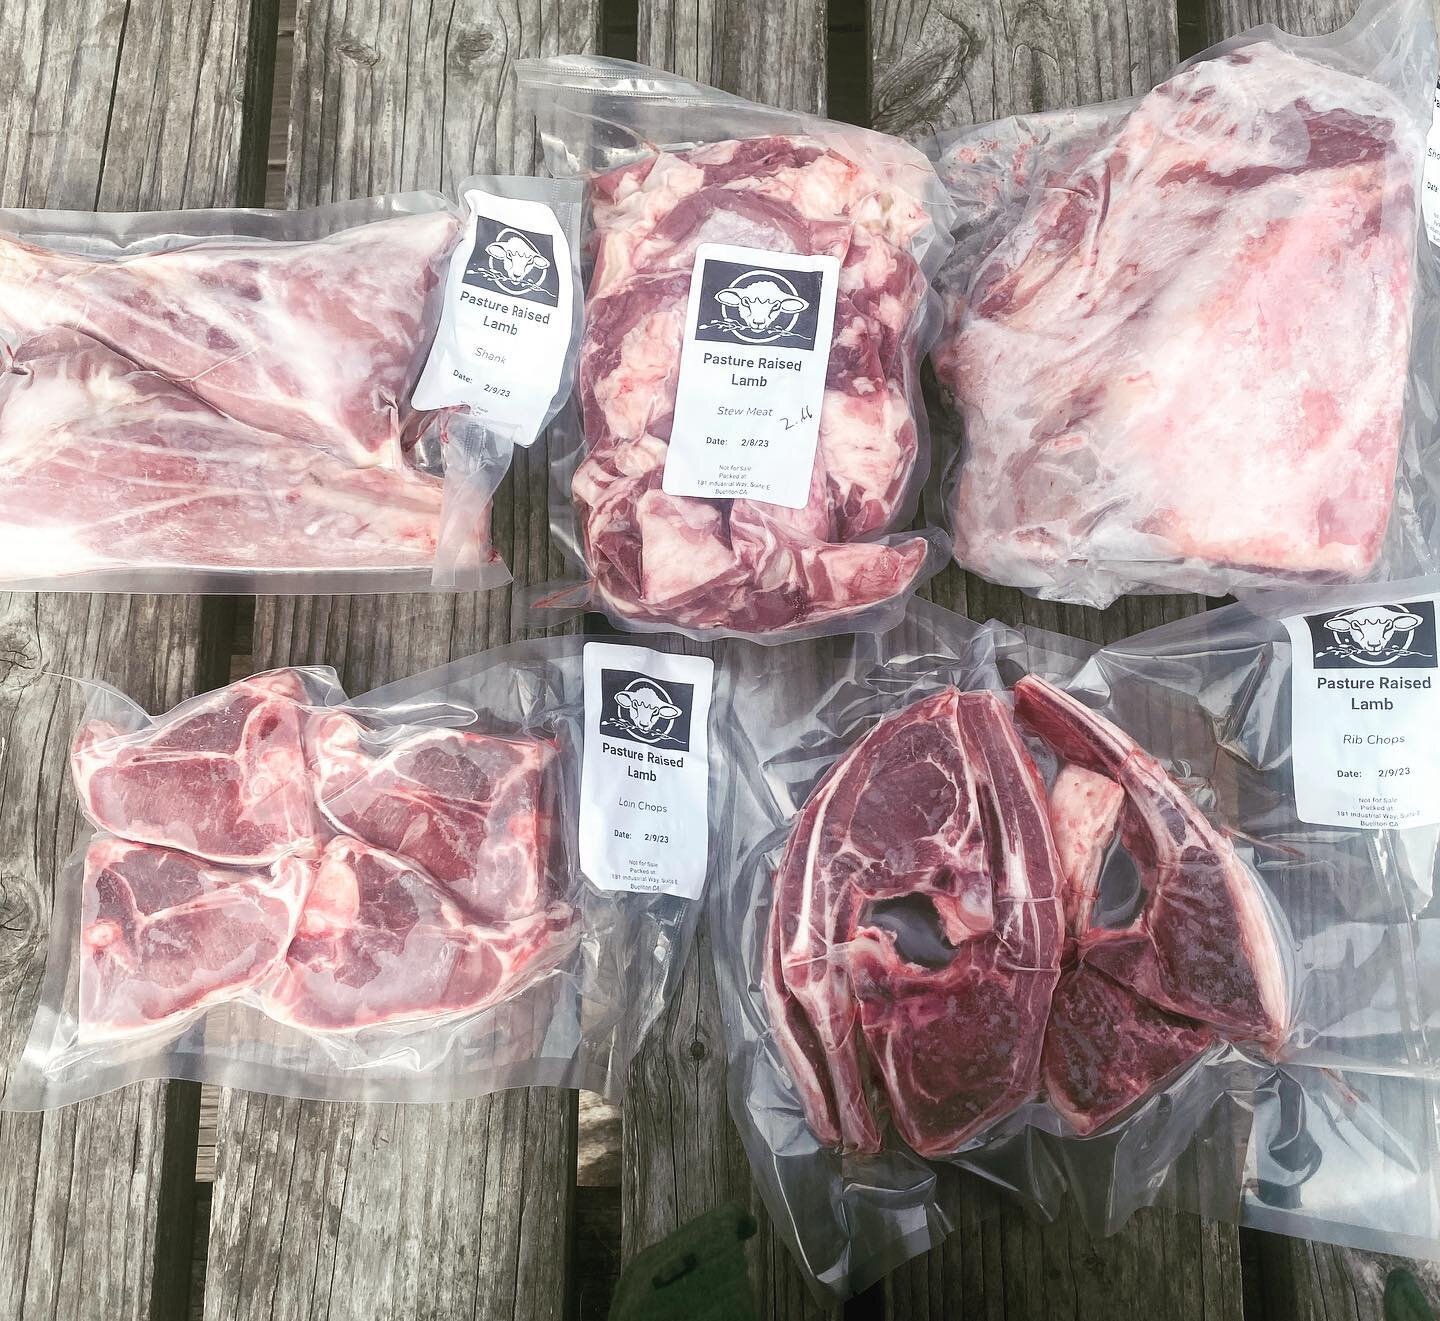 We have lots of beautiful meat on hand and available for purchase at the moment. Can be purchased as half or whole lamb or individual cuts. DM me if you&rsquo;re interested and I&rsquo;ll share details.